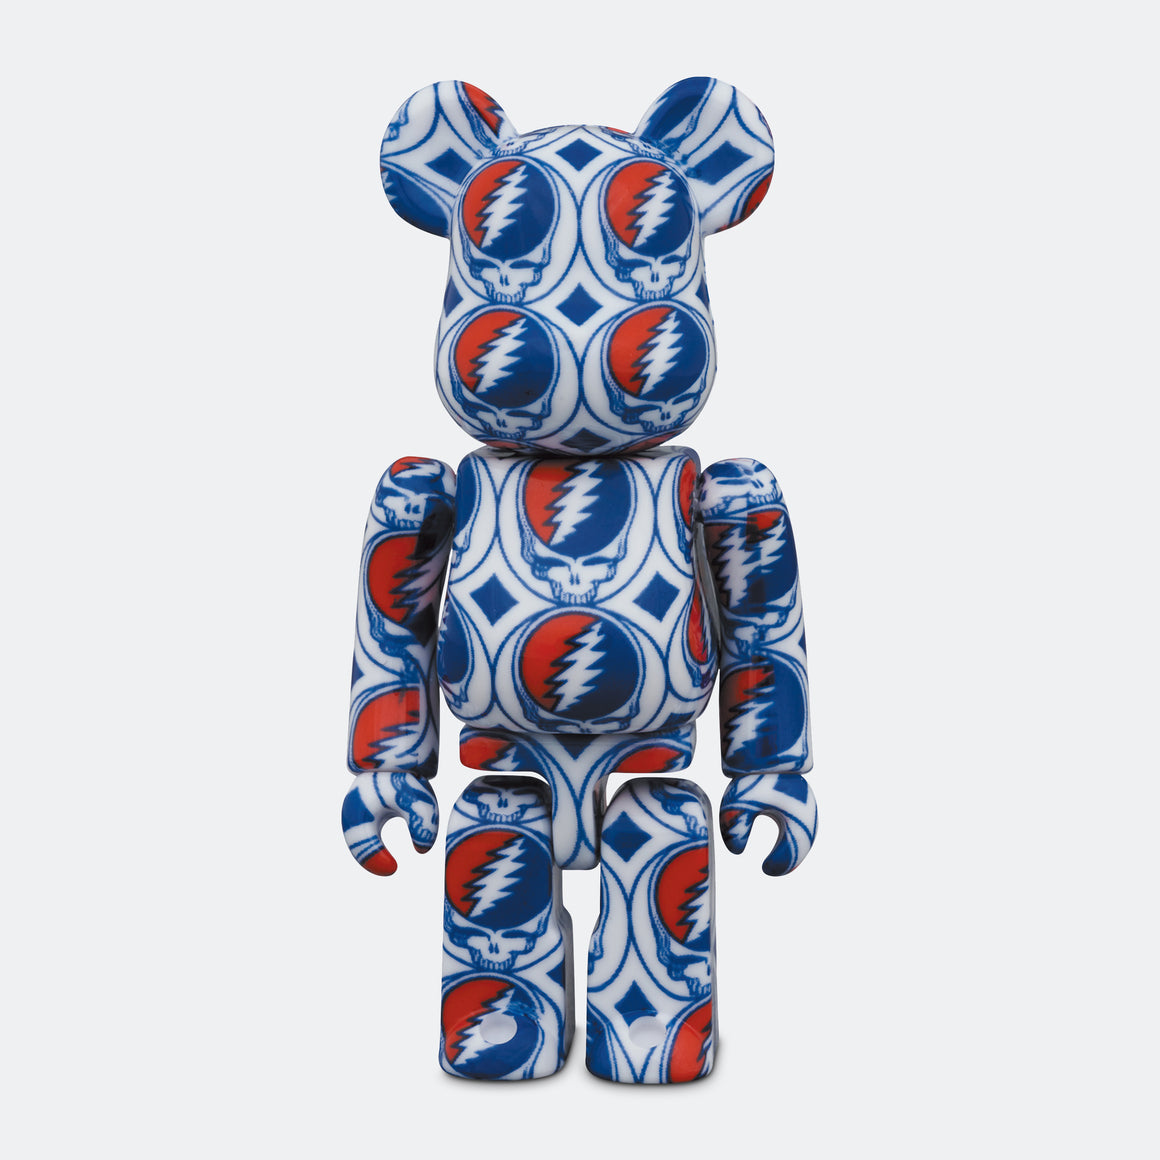 Medicom Toy - Be@rbrick x Grateful Dead 400% Set - Steal Your Face - UP THERE